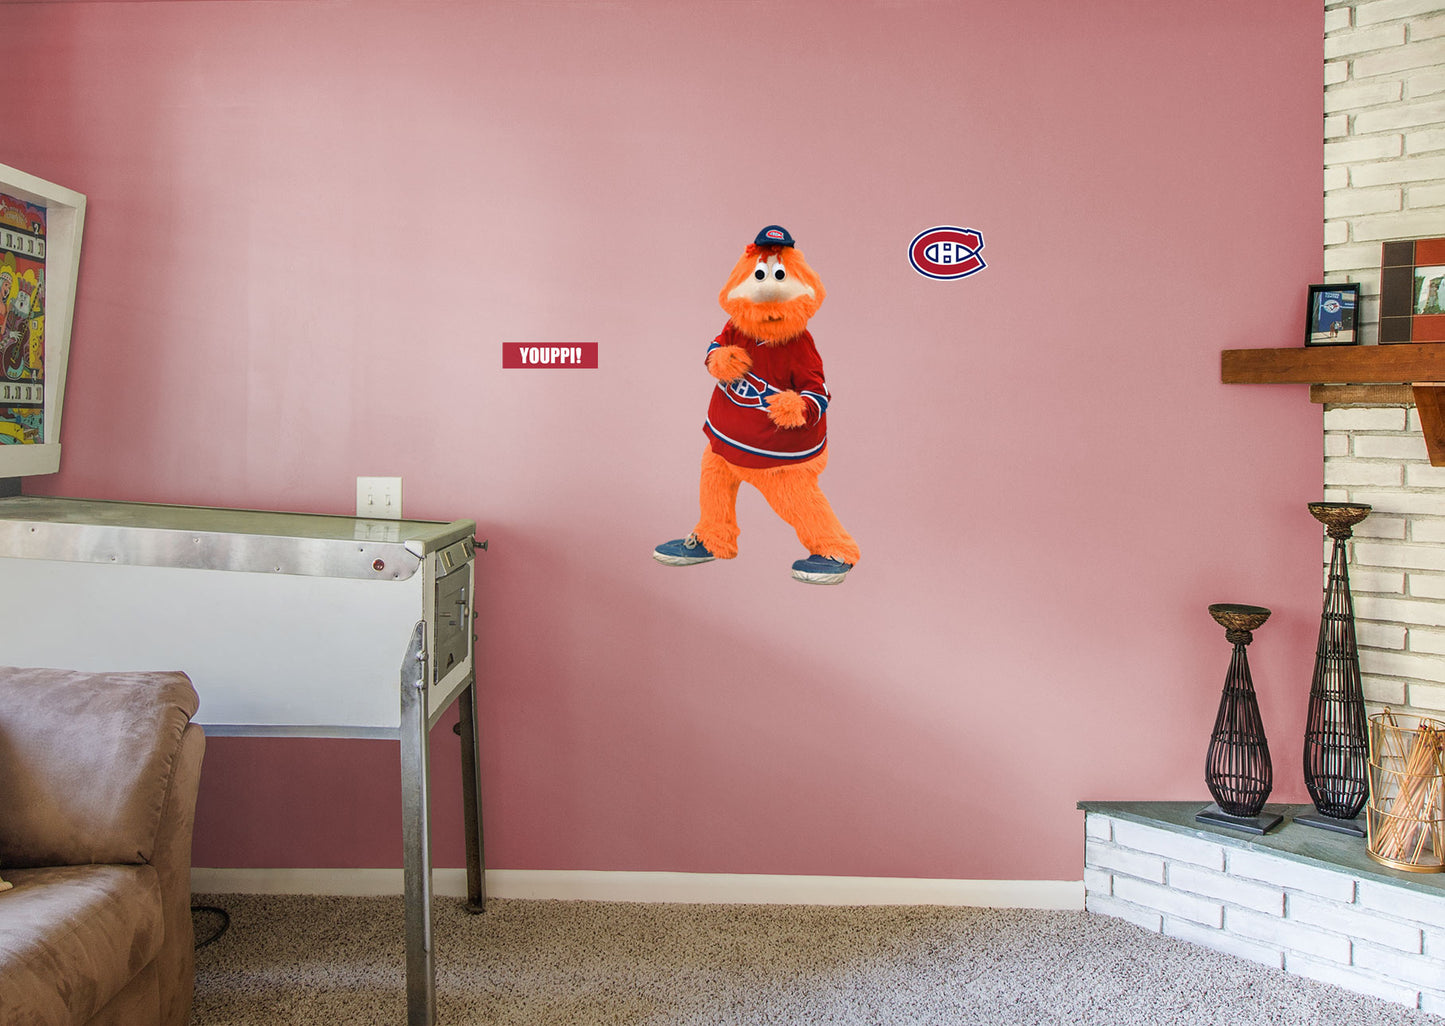 Montreal Canadiens: Youppi! 2021 Mascot        - Officially Licensed NHL Removable Wall   Adhesive Decal